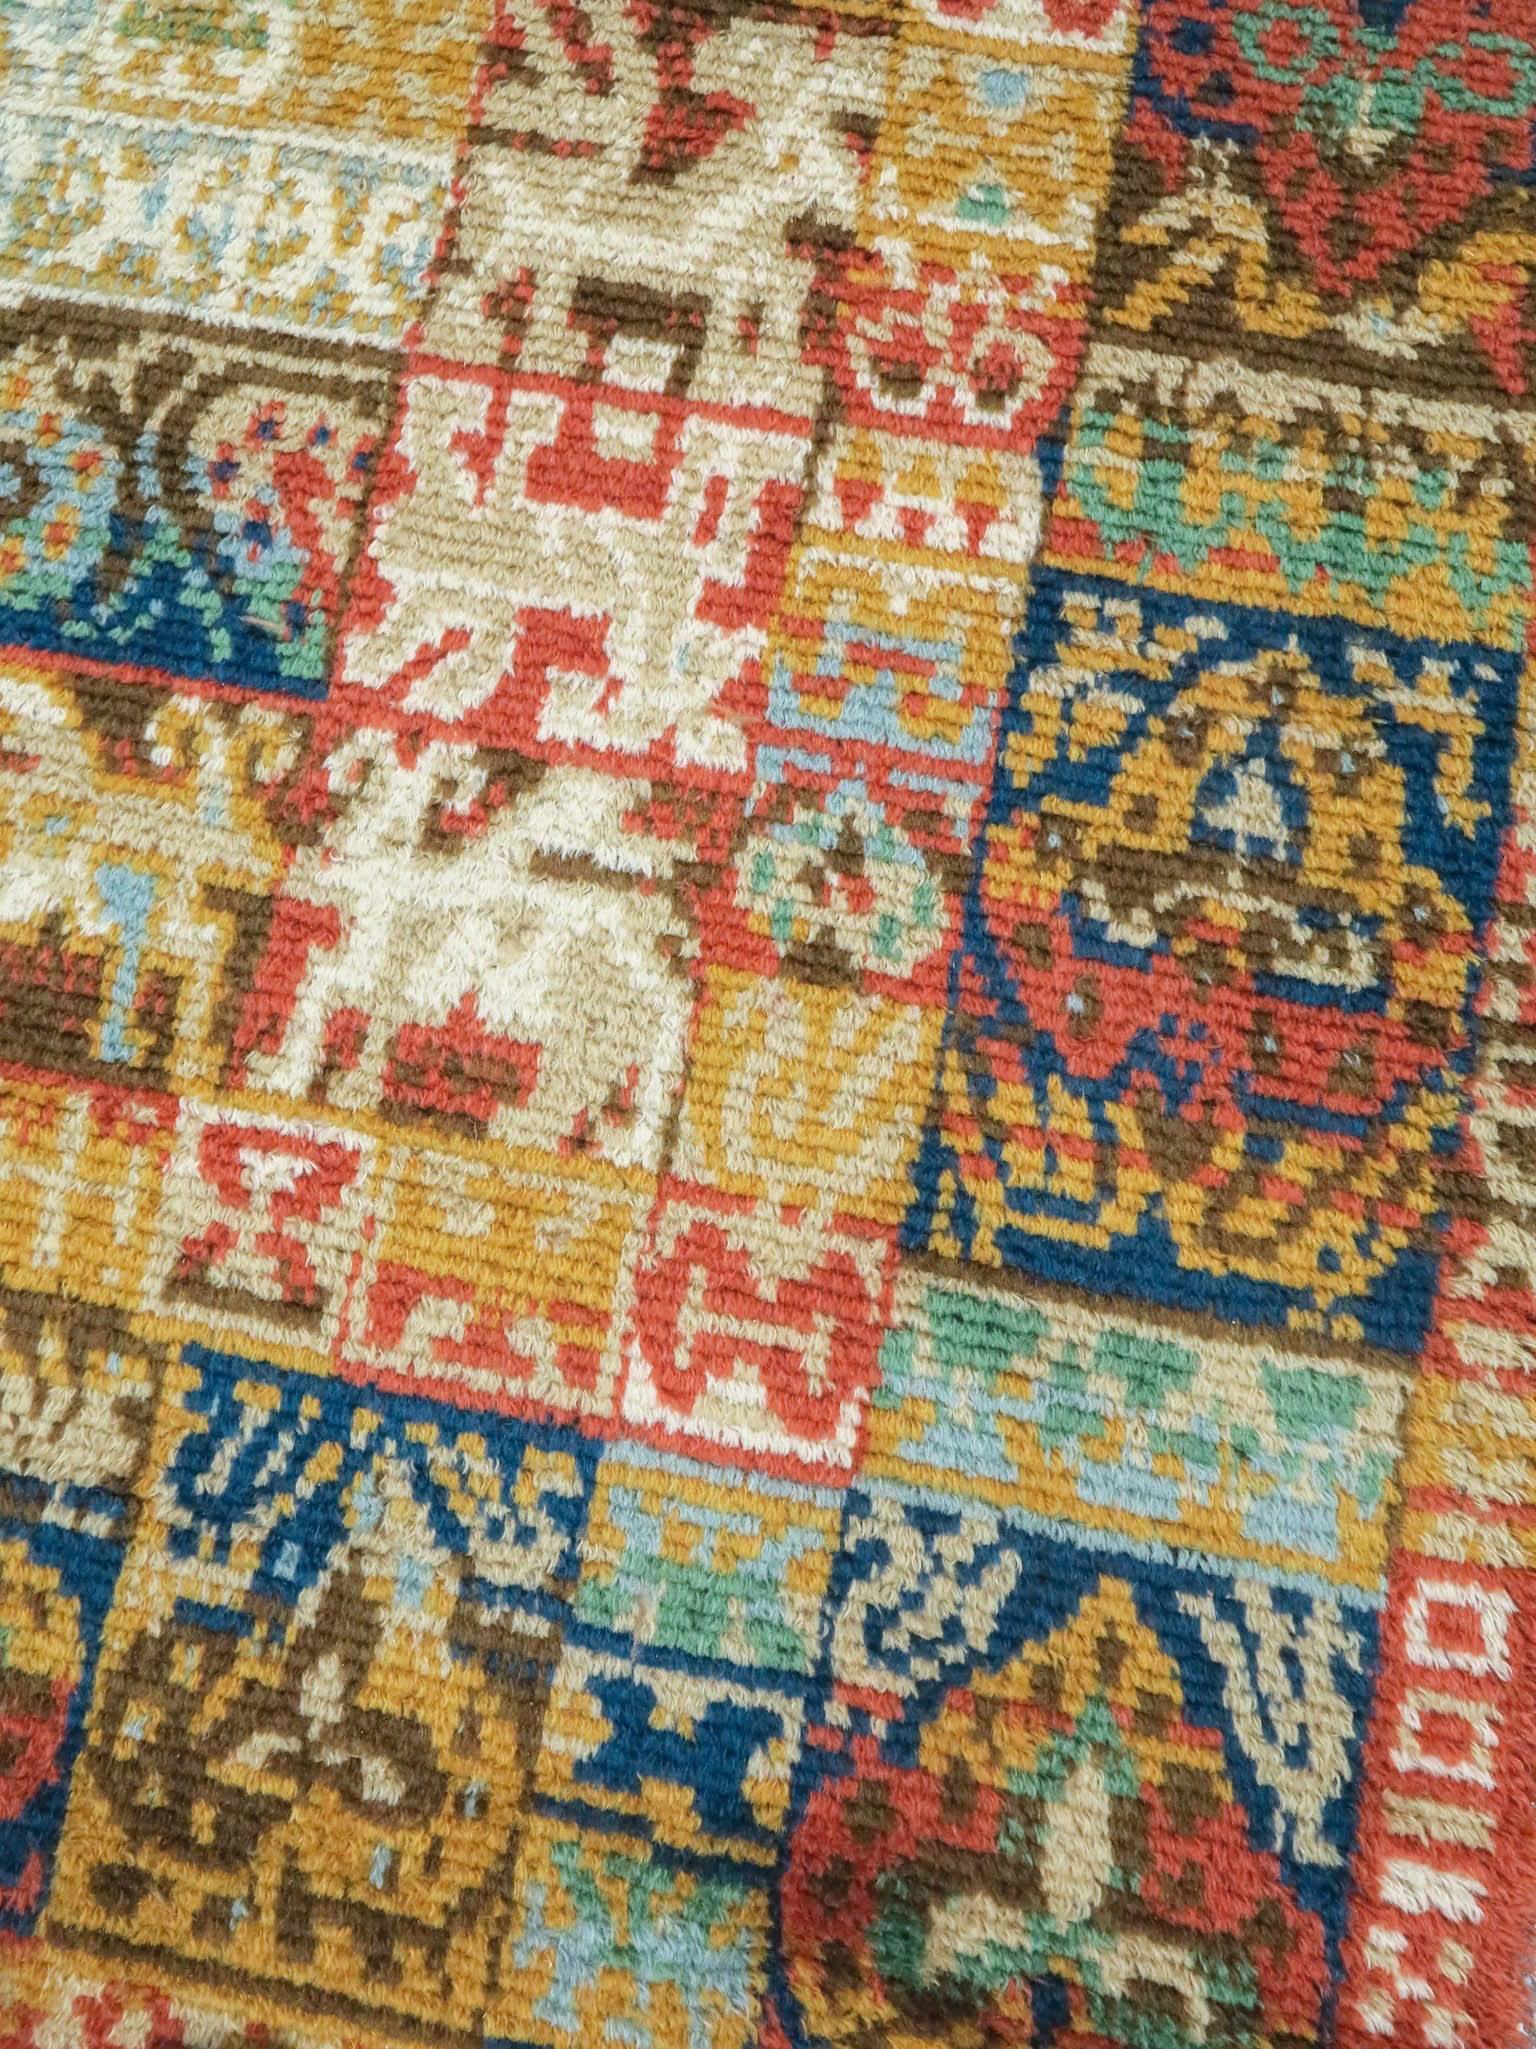 Mid 20th Century Wool Scandinavian Pile Rug In Excellent Condition For Sale In San Francisco, CA